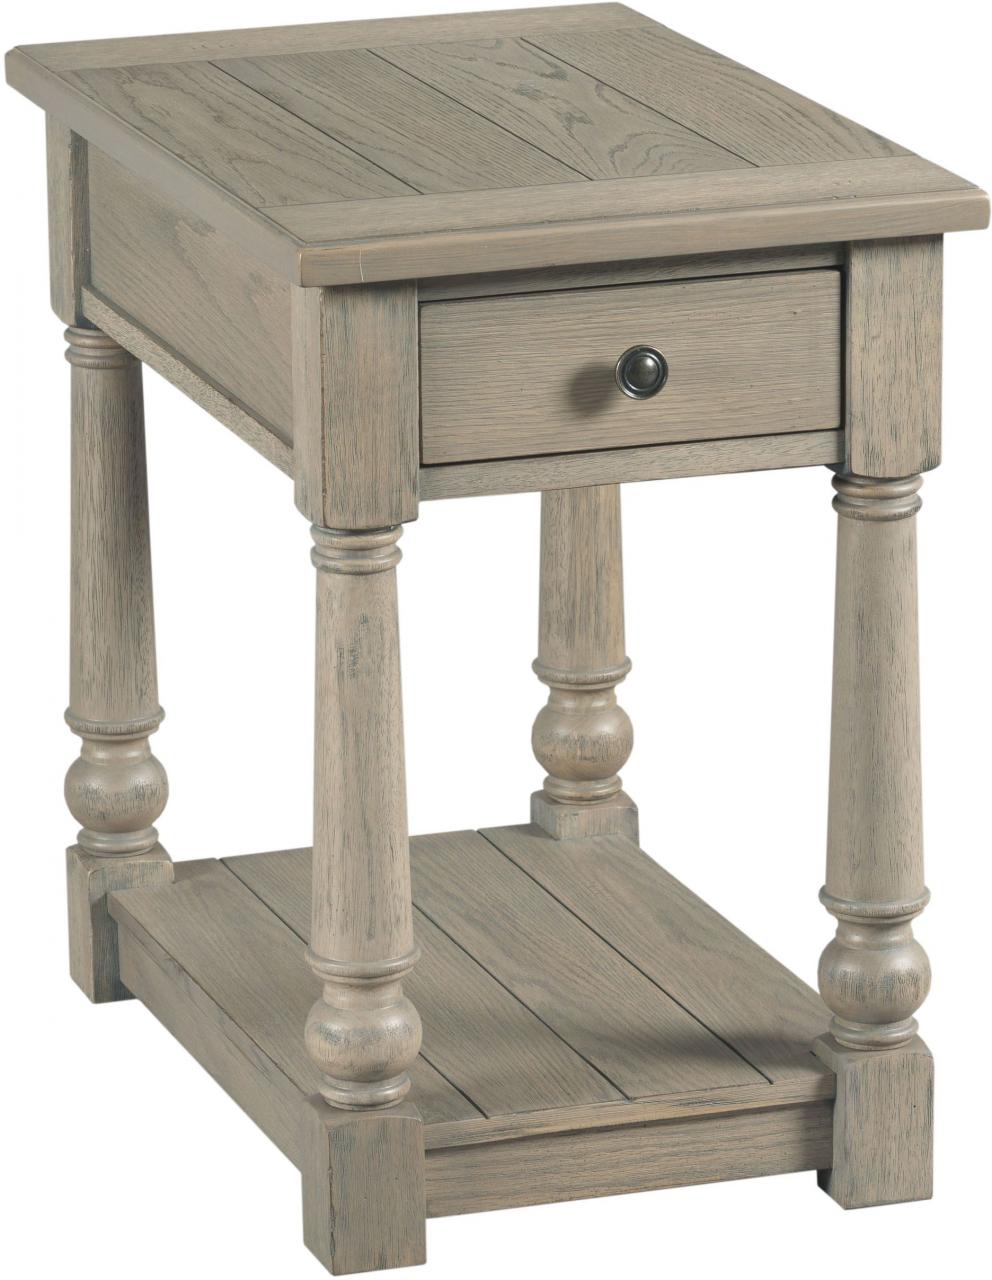 England Furniture Outland Chairside Table-H718916